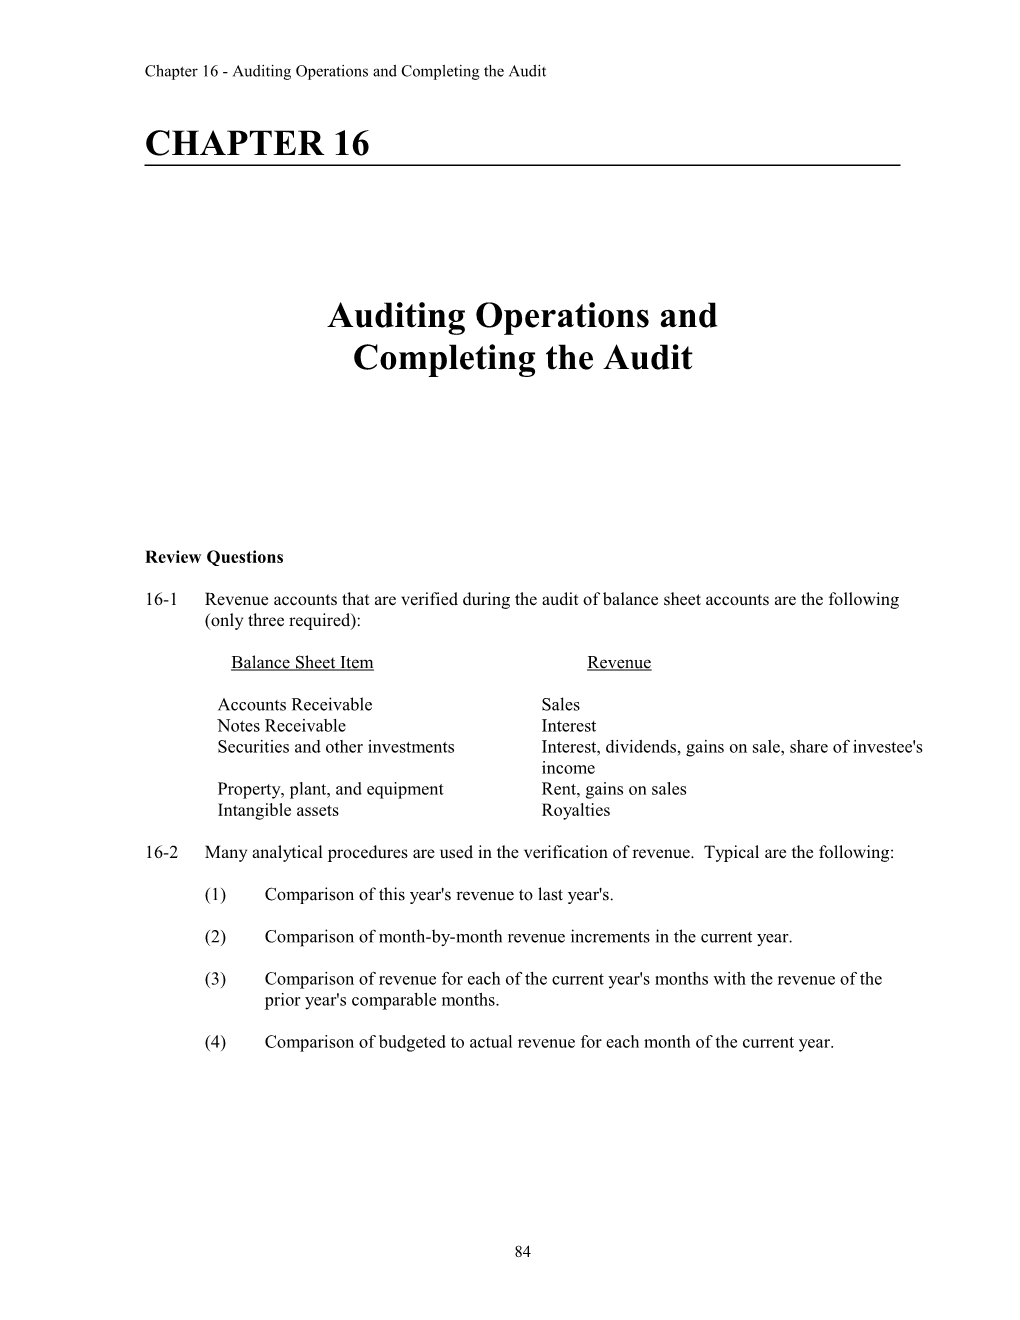 Chapter 16 - Auditing Operations and Completing the Audit